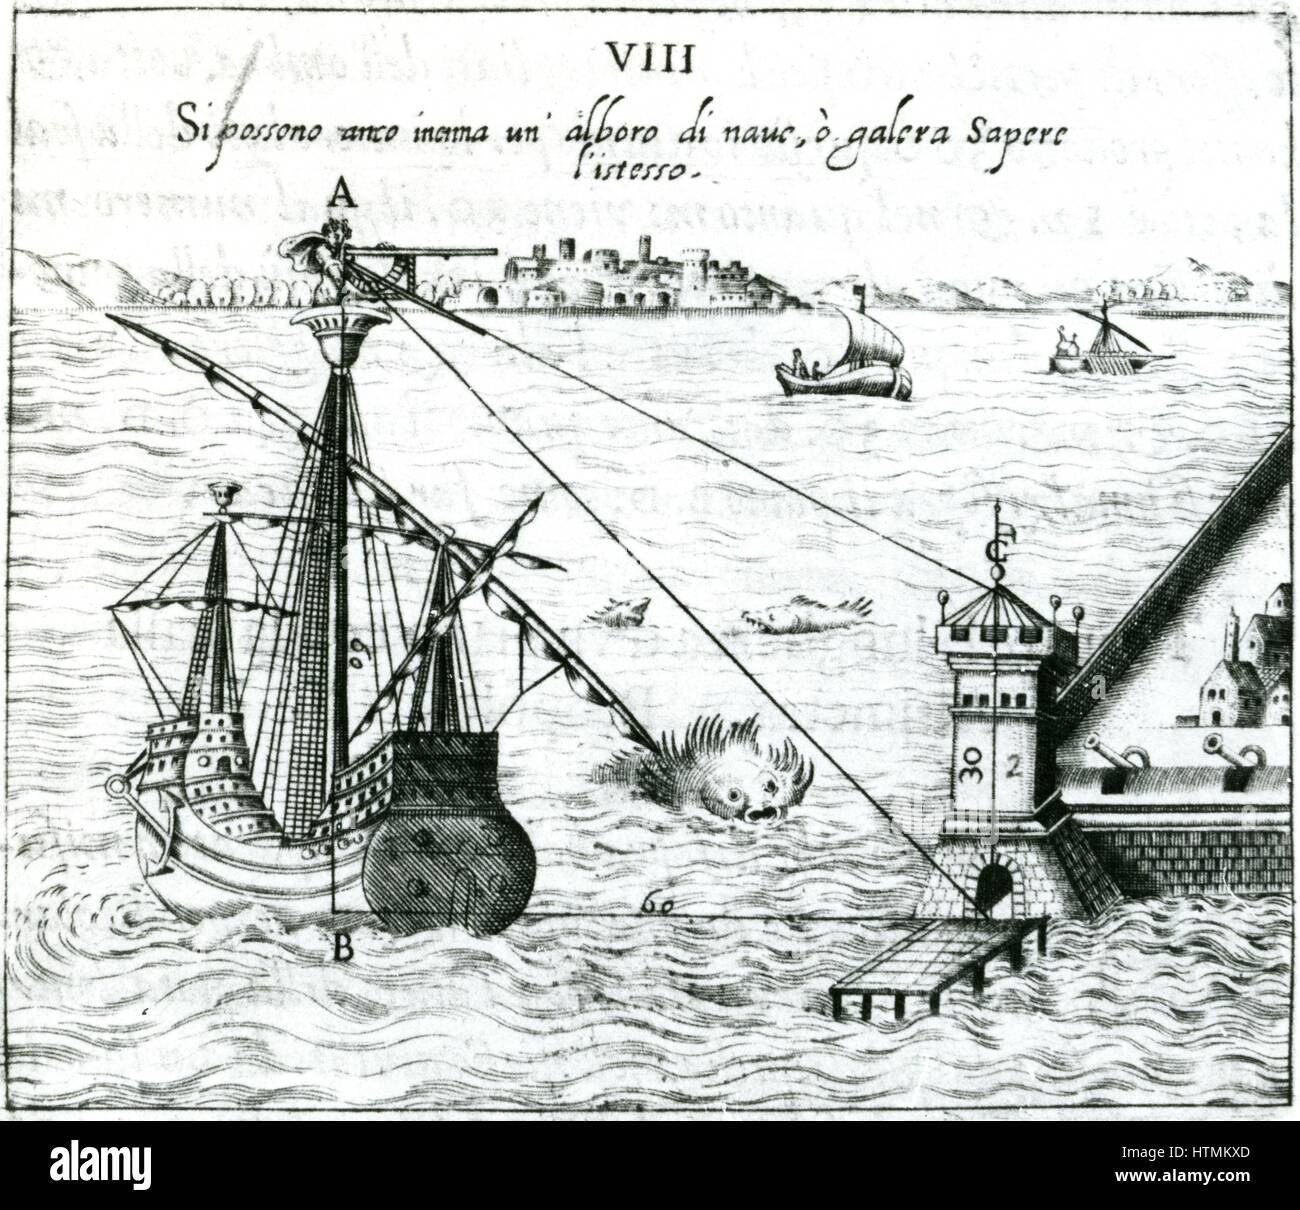 Measuring the distance from ship to shore, using a quadrant marked with shadow-scales. From Ottavius Fabri 'L'usa della squadra mobile', Venice, 1598. Engraving Stock Photo